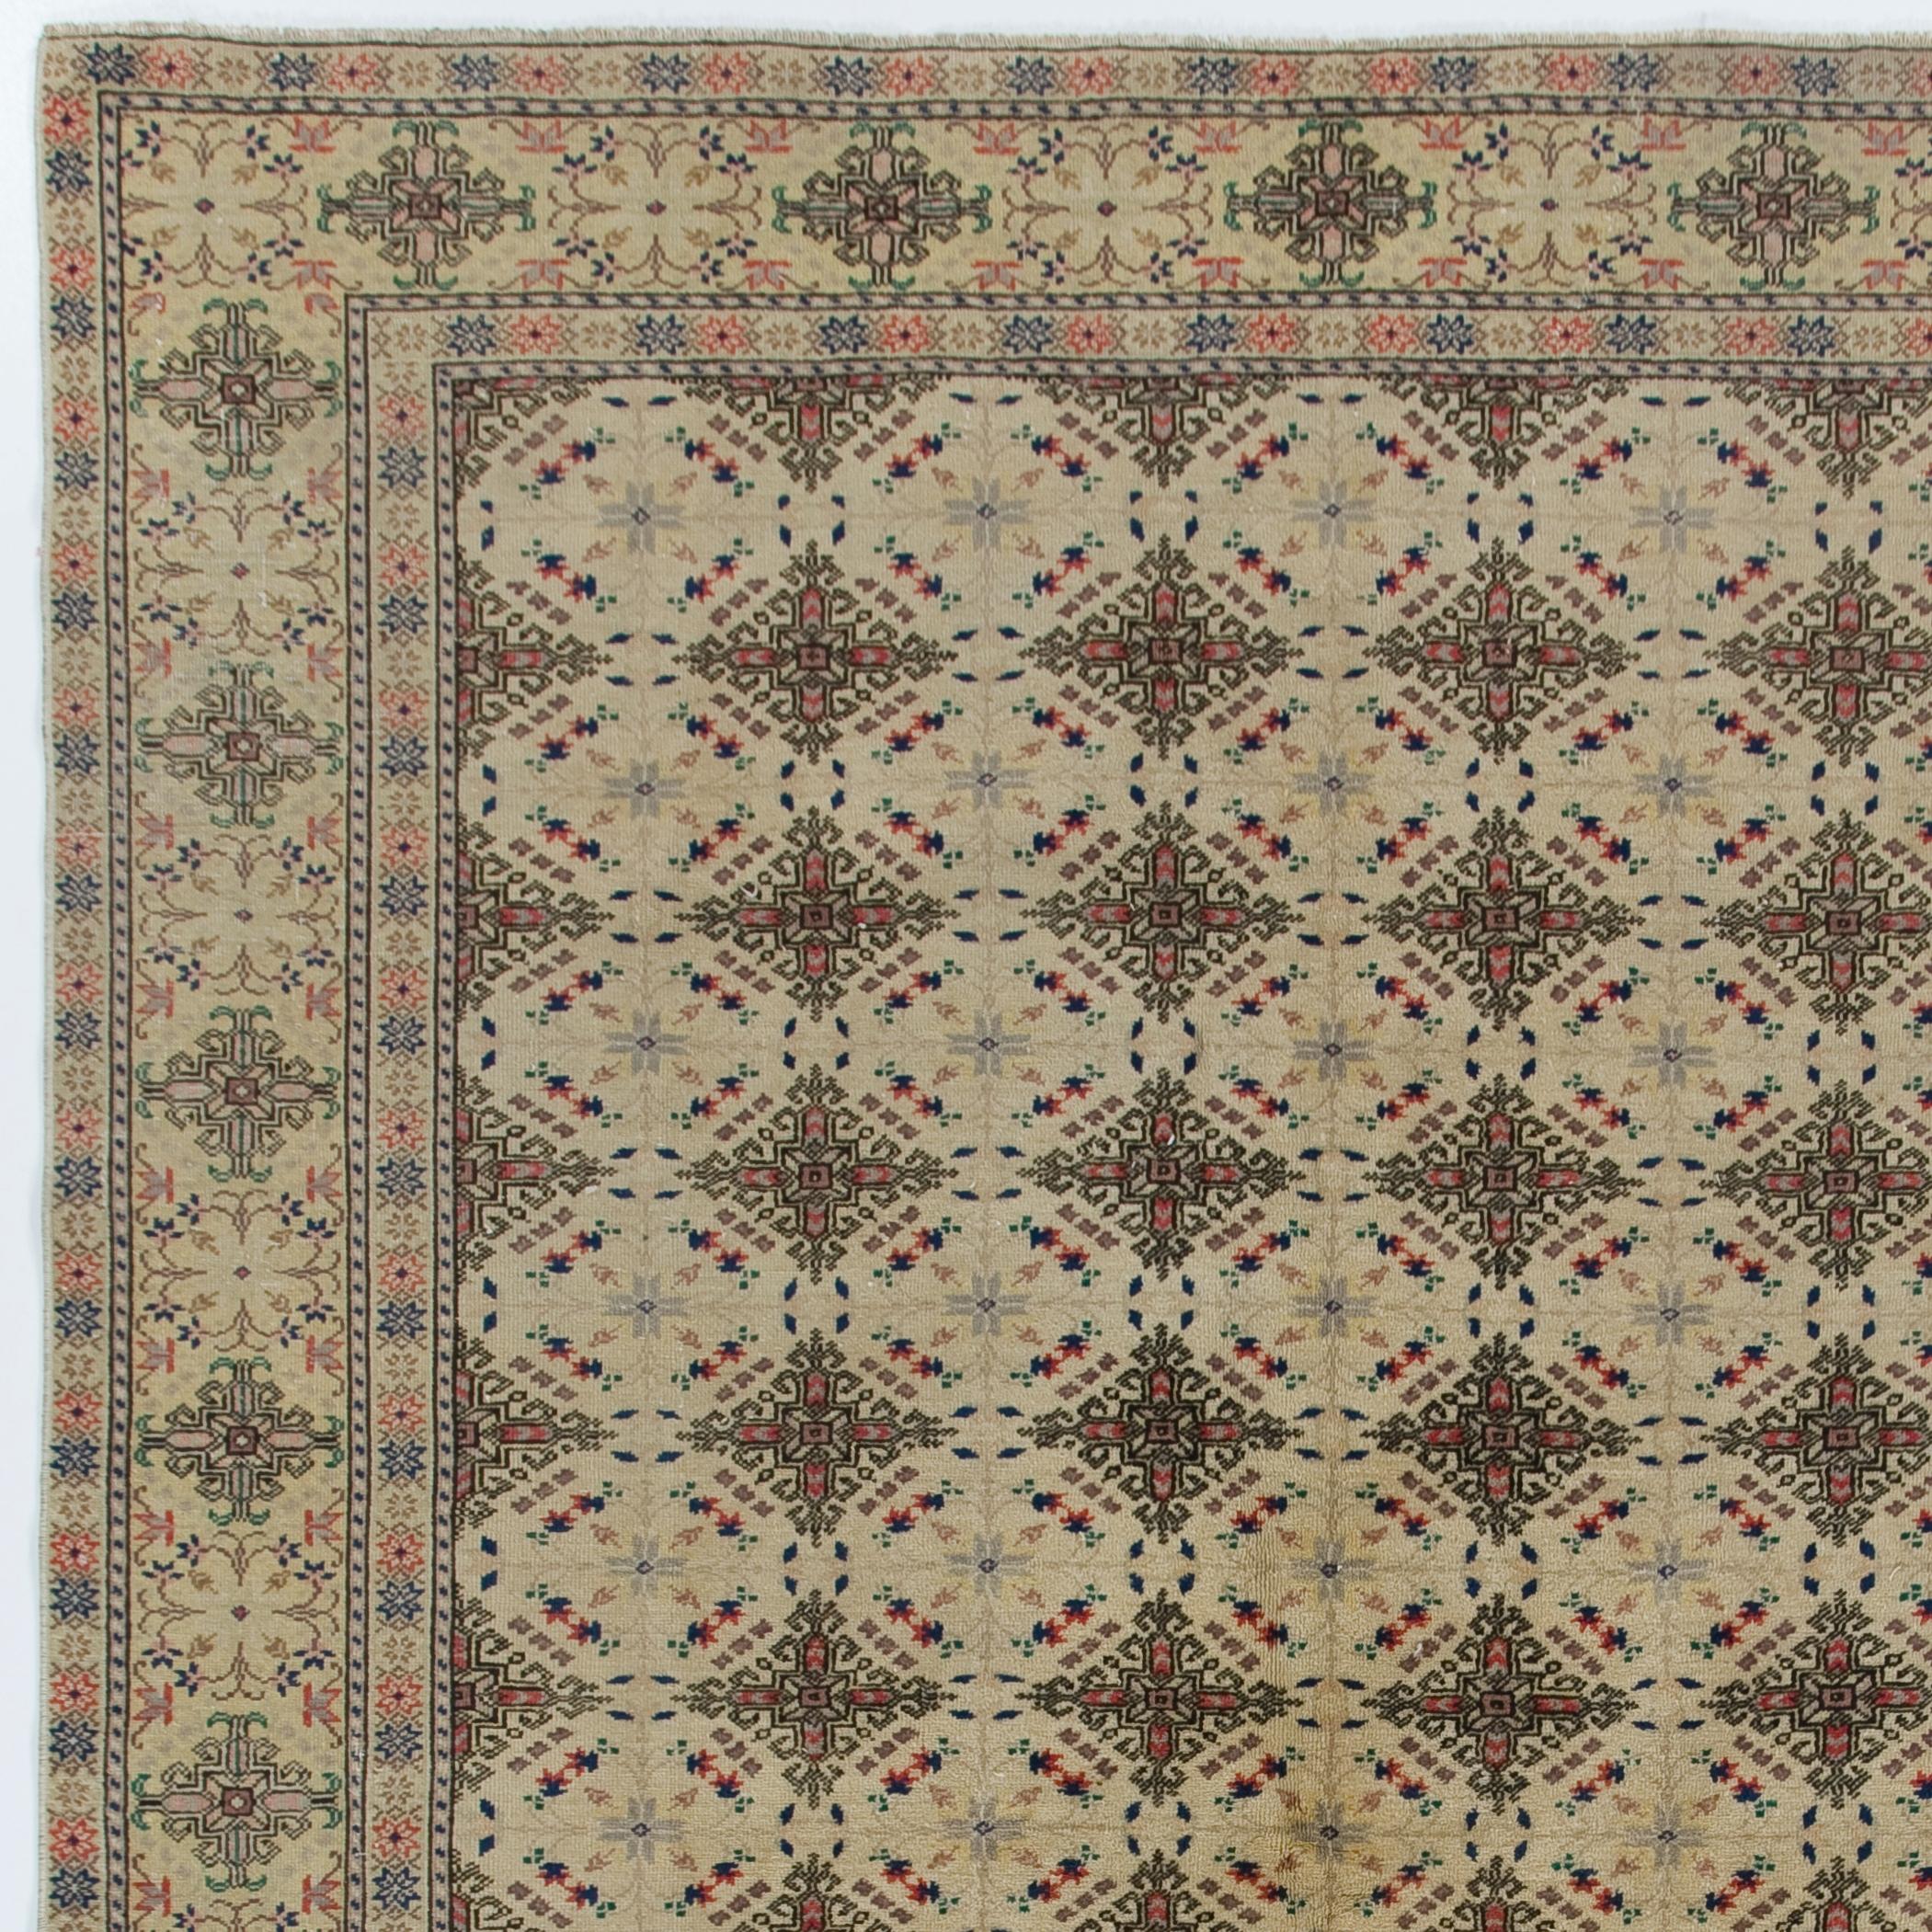 A finely hand-knotted rug from Central Anatolia with attractive colors and design. Size: 6.2 x 9.5 ft.
Wool pile on cotton foundation. Very good condition. Sturdy and as clean as a brand new rug (deep washed professionally).